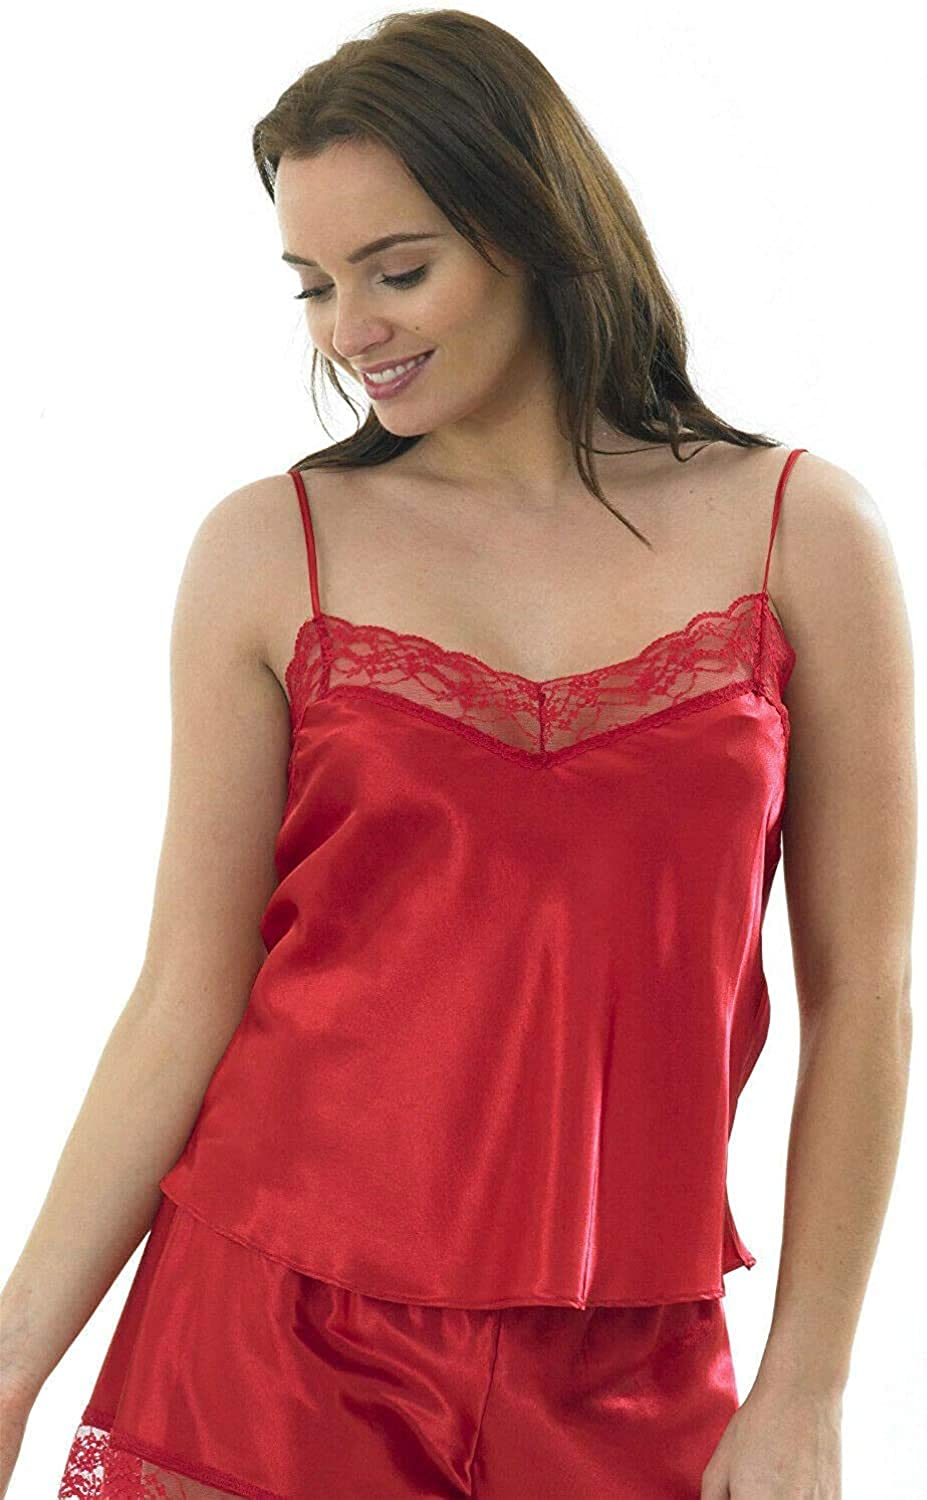 Ladies Satin Cami Top Lace Silky Vest Sexy Lingerie 